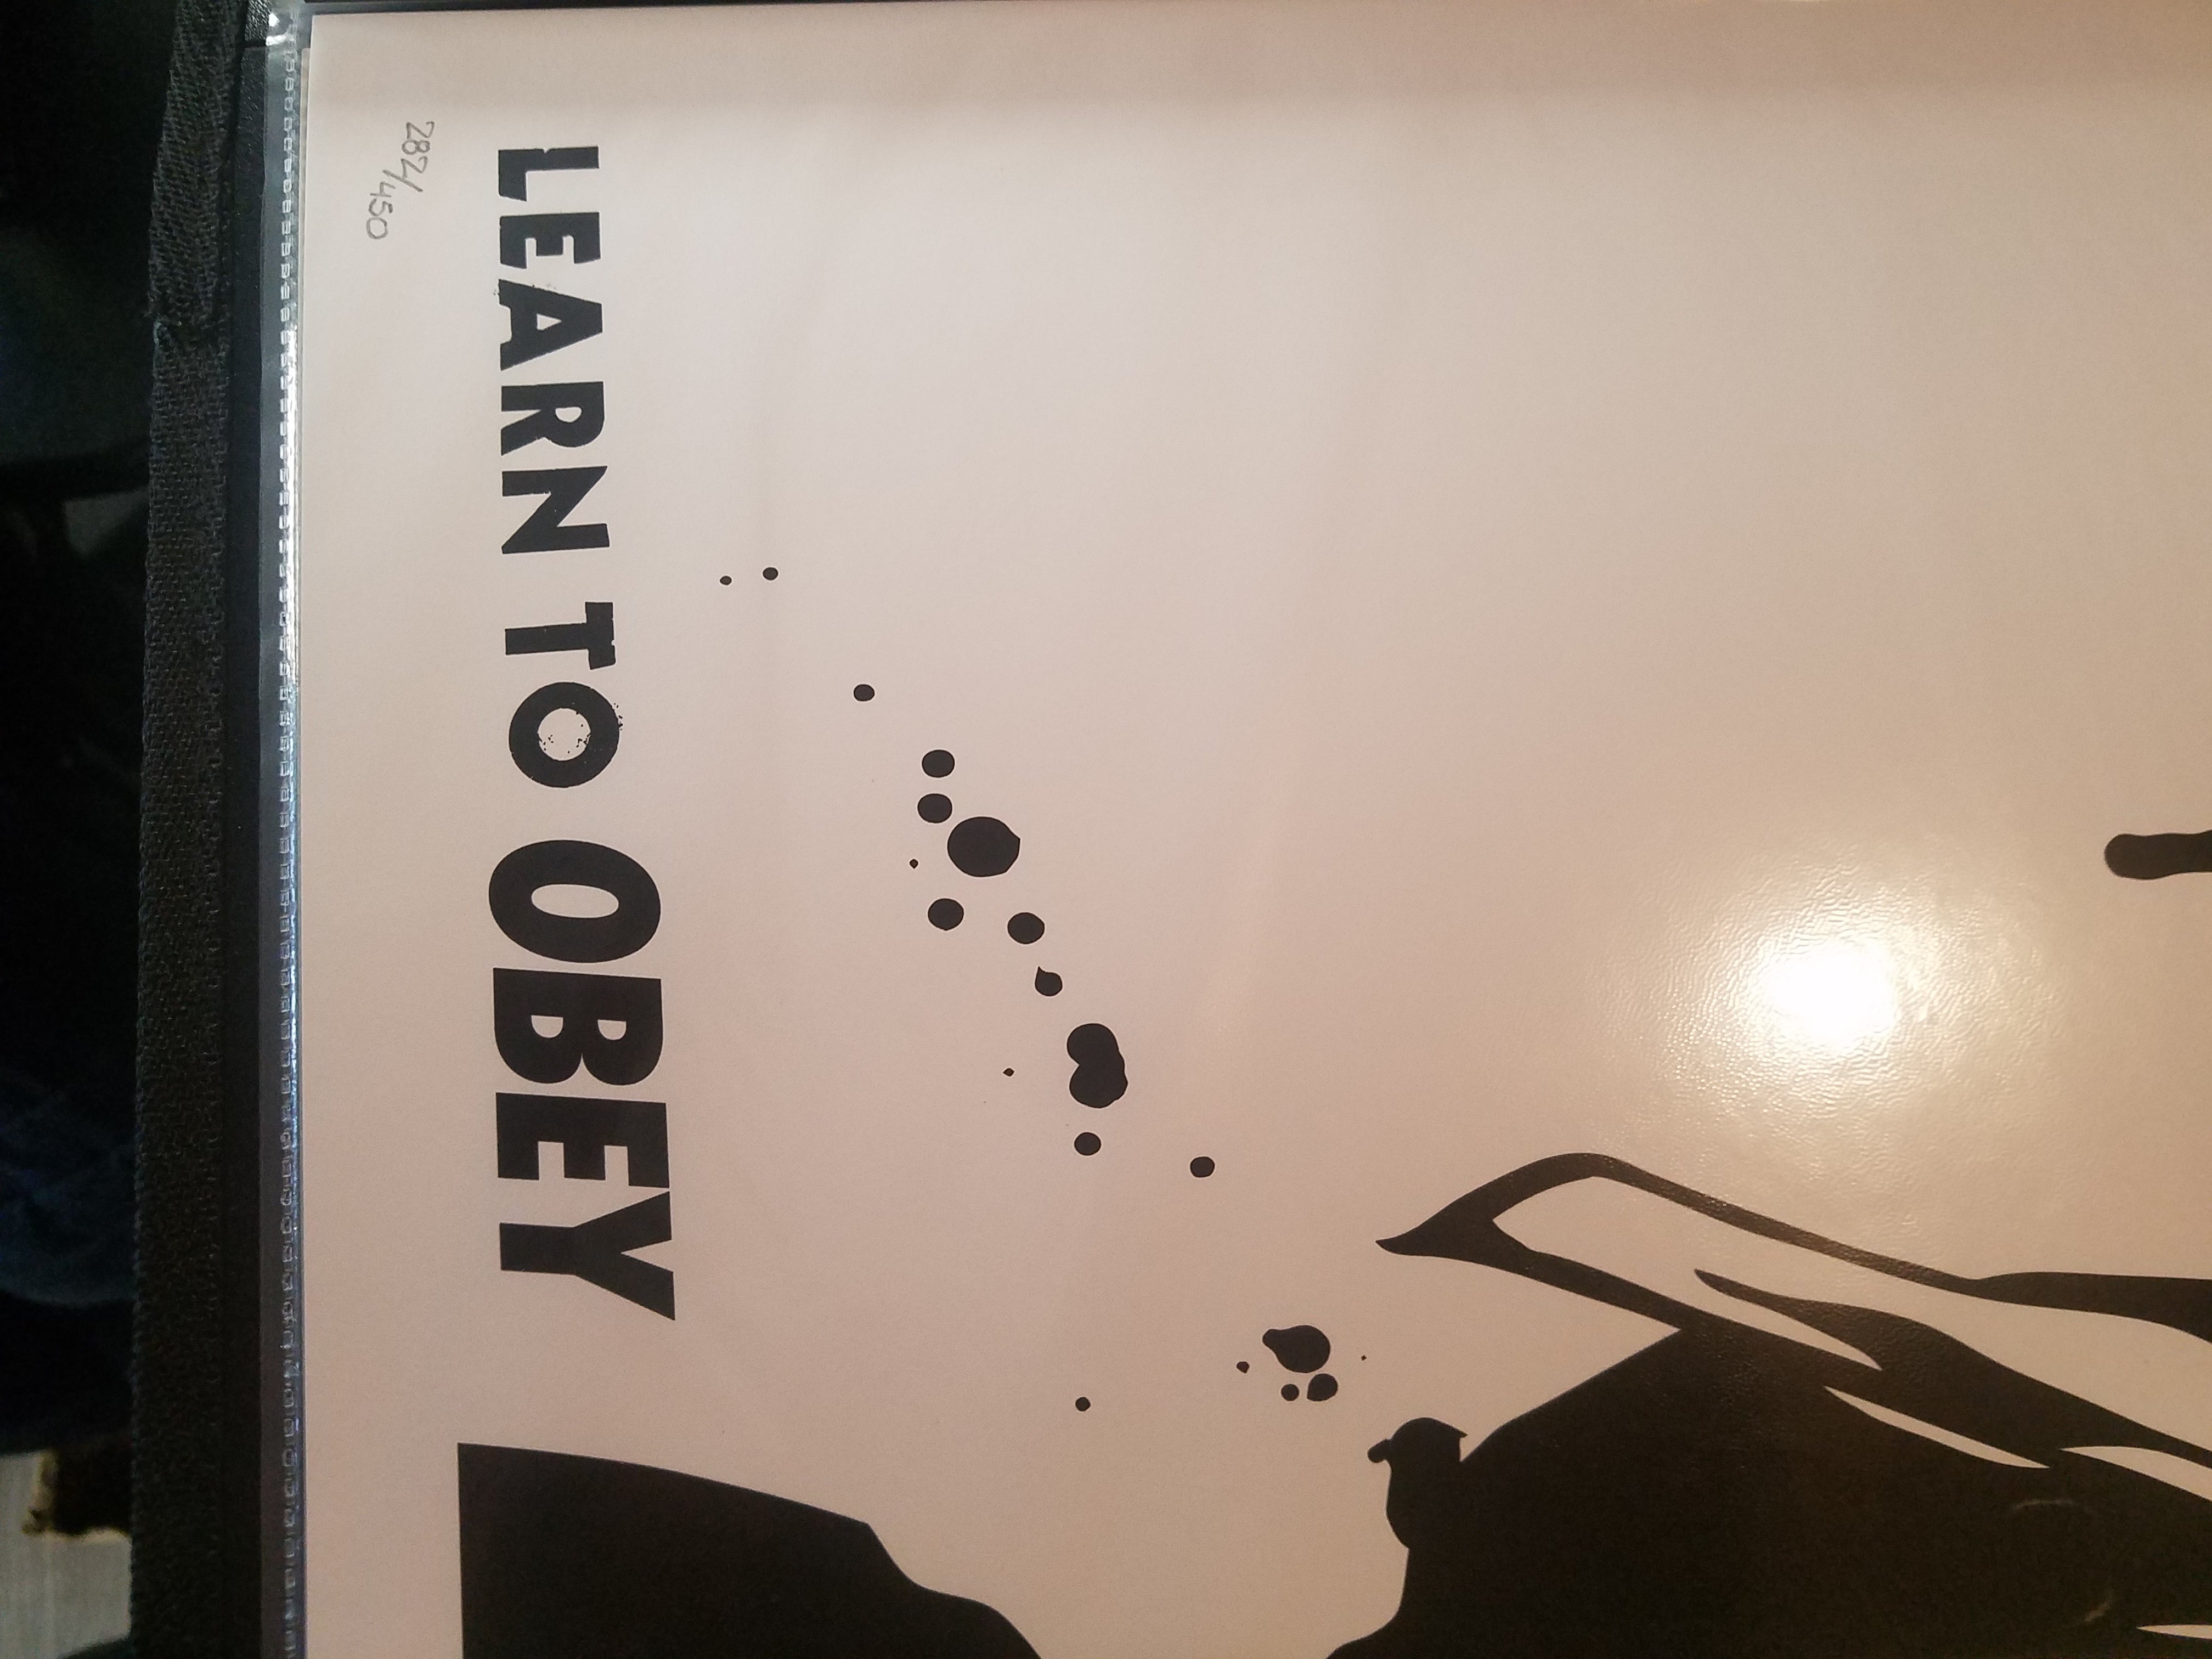 LEARN TO OBEY - Shepard Fairey - 2014 Poster, signed, numbered